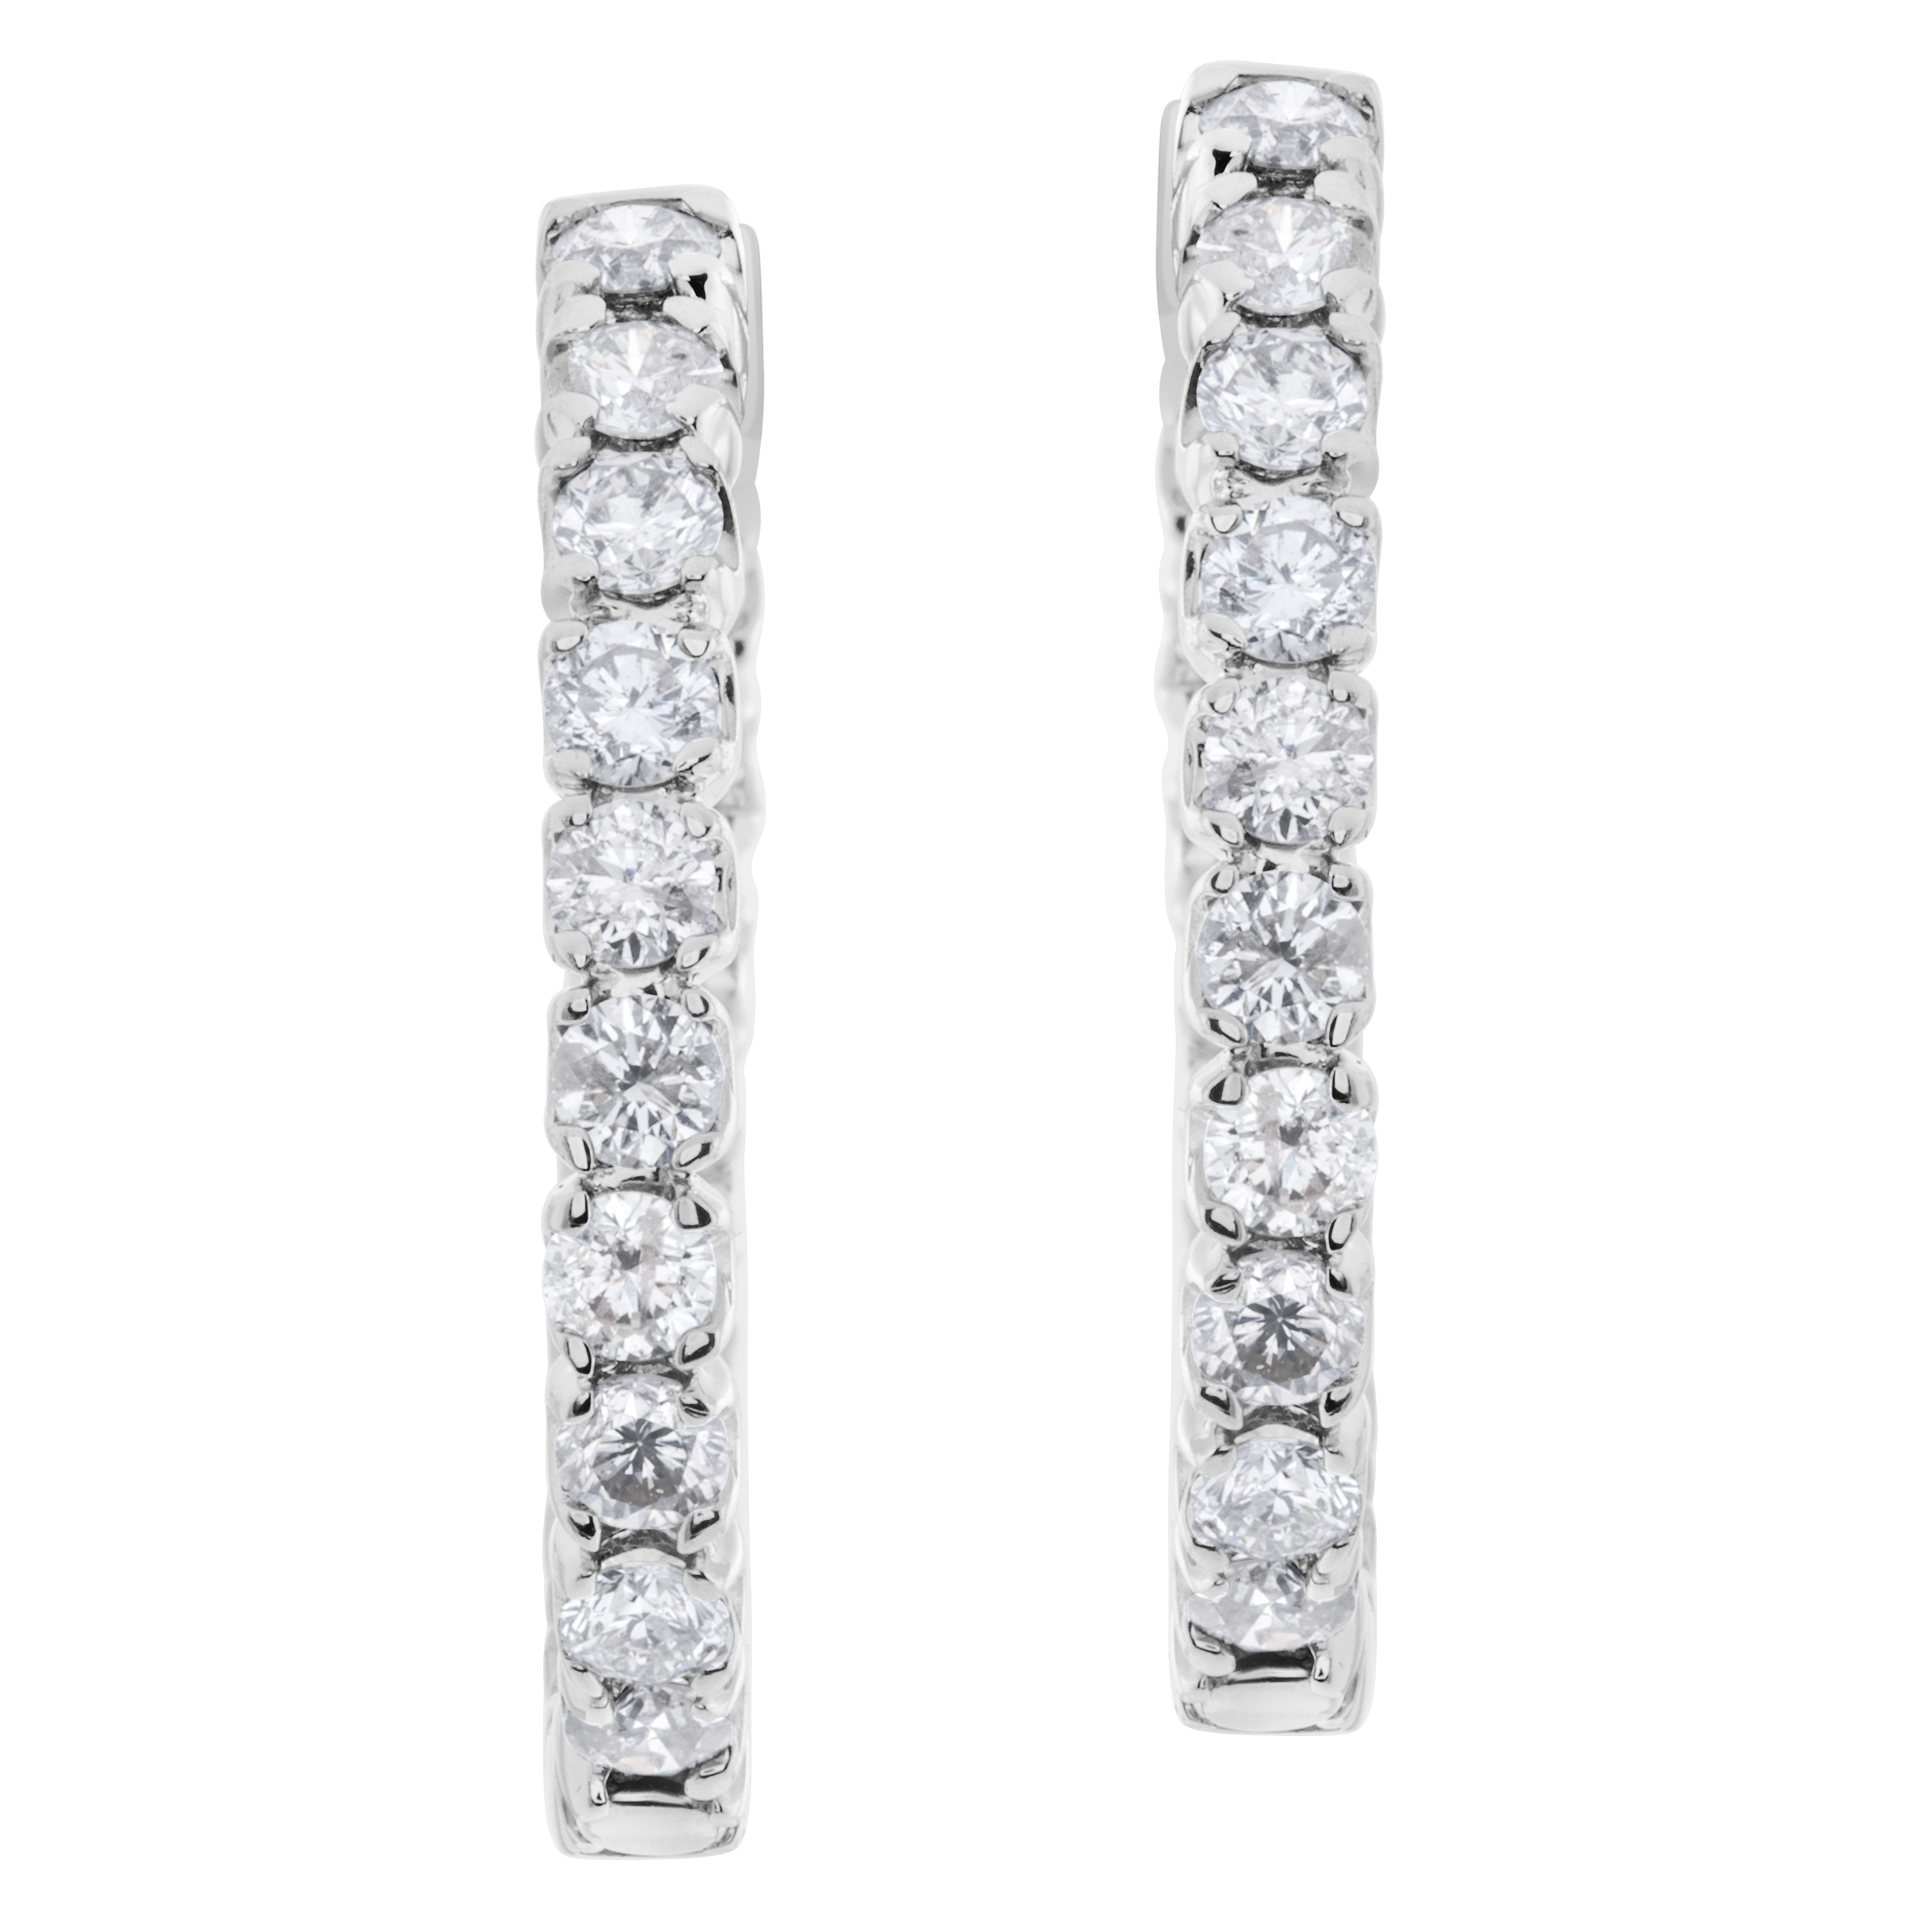 Diamond hoop earrings in 14k white gold with over 3 carats in round diamonds. 1 inch diameter